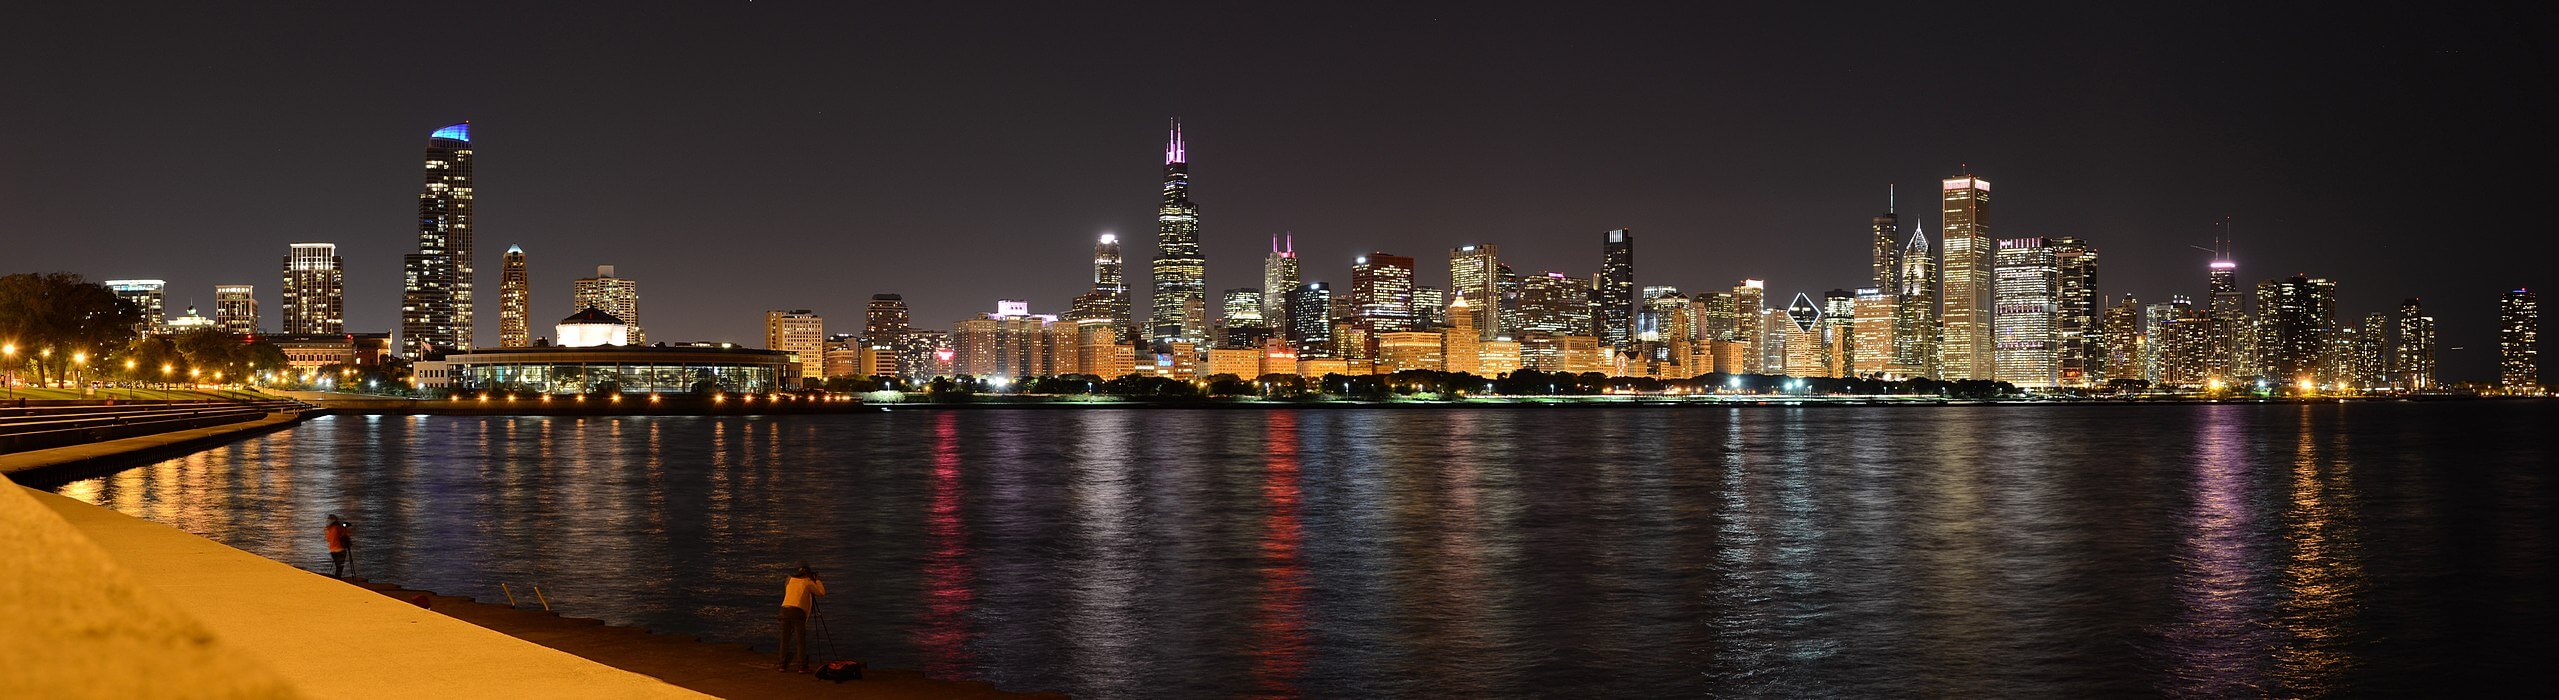 the chicago skyline at night